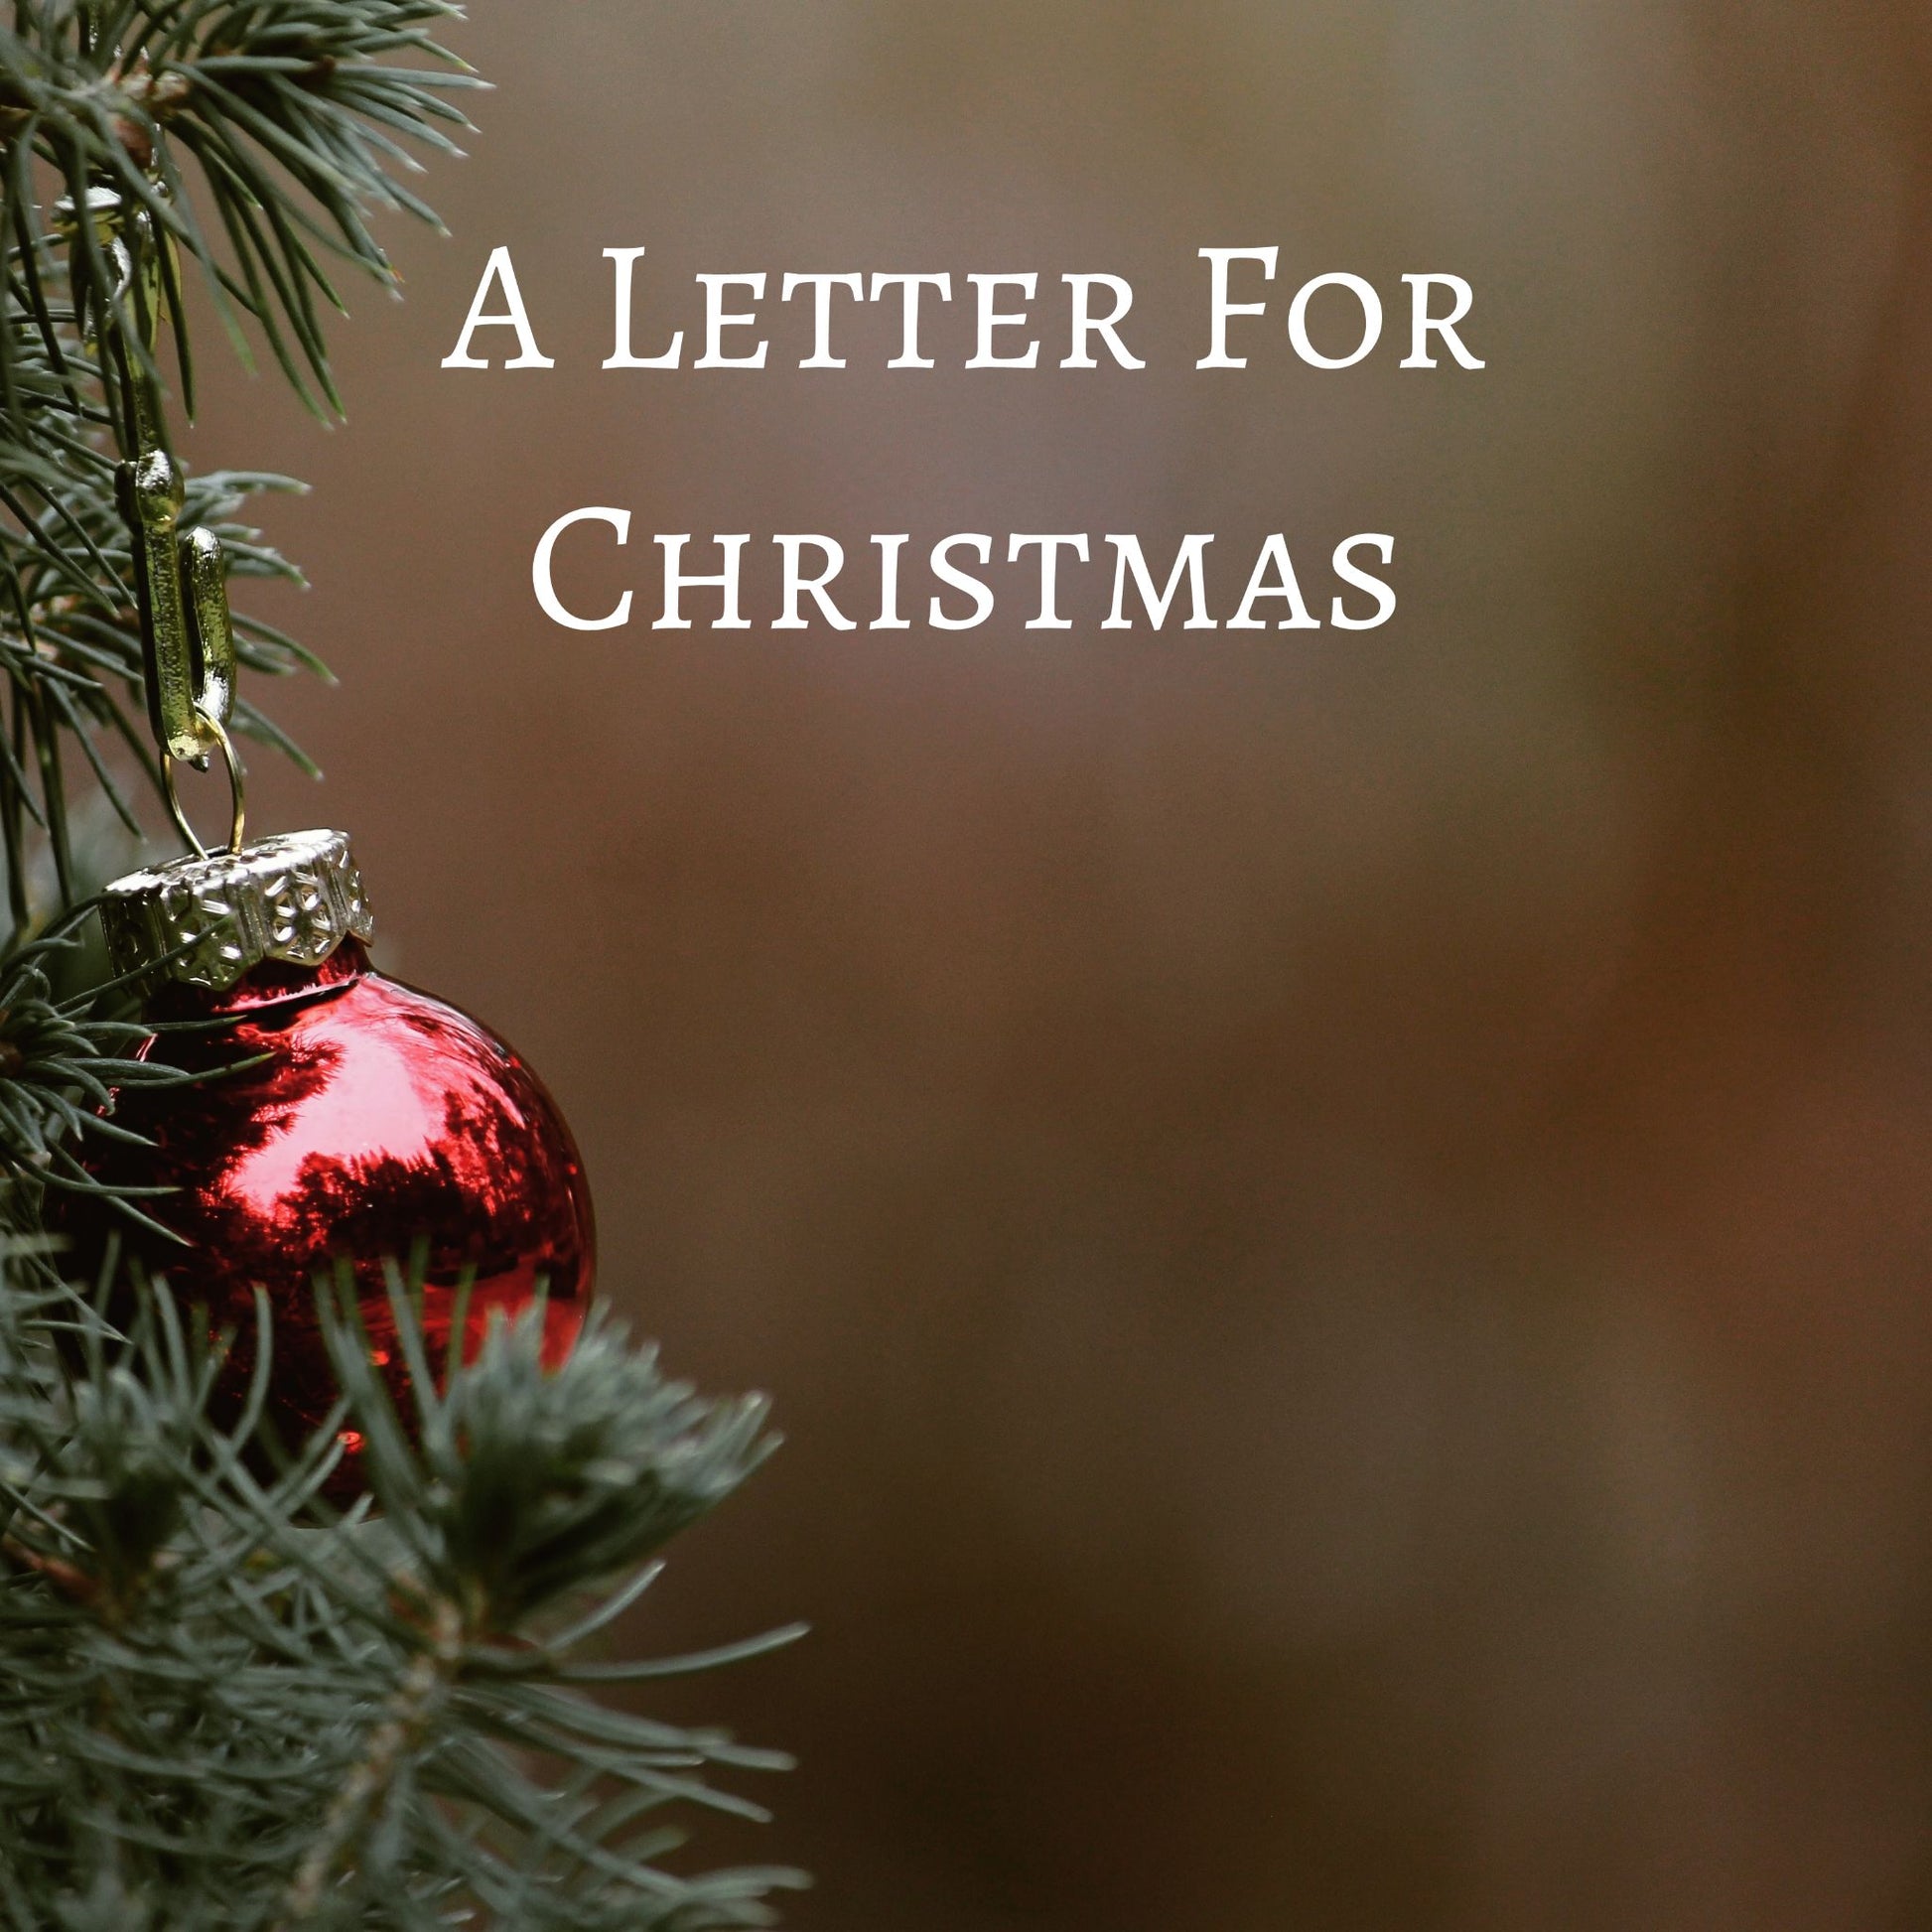 CD Cover of song A Letter for Christmas